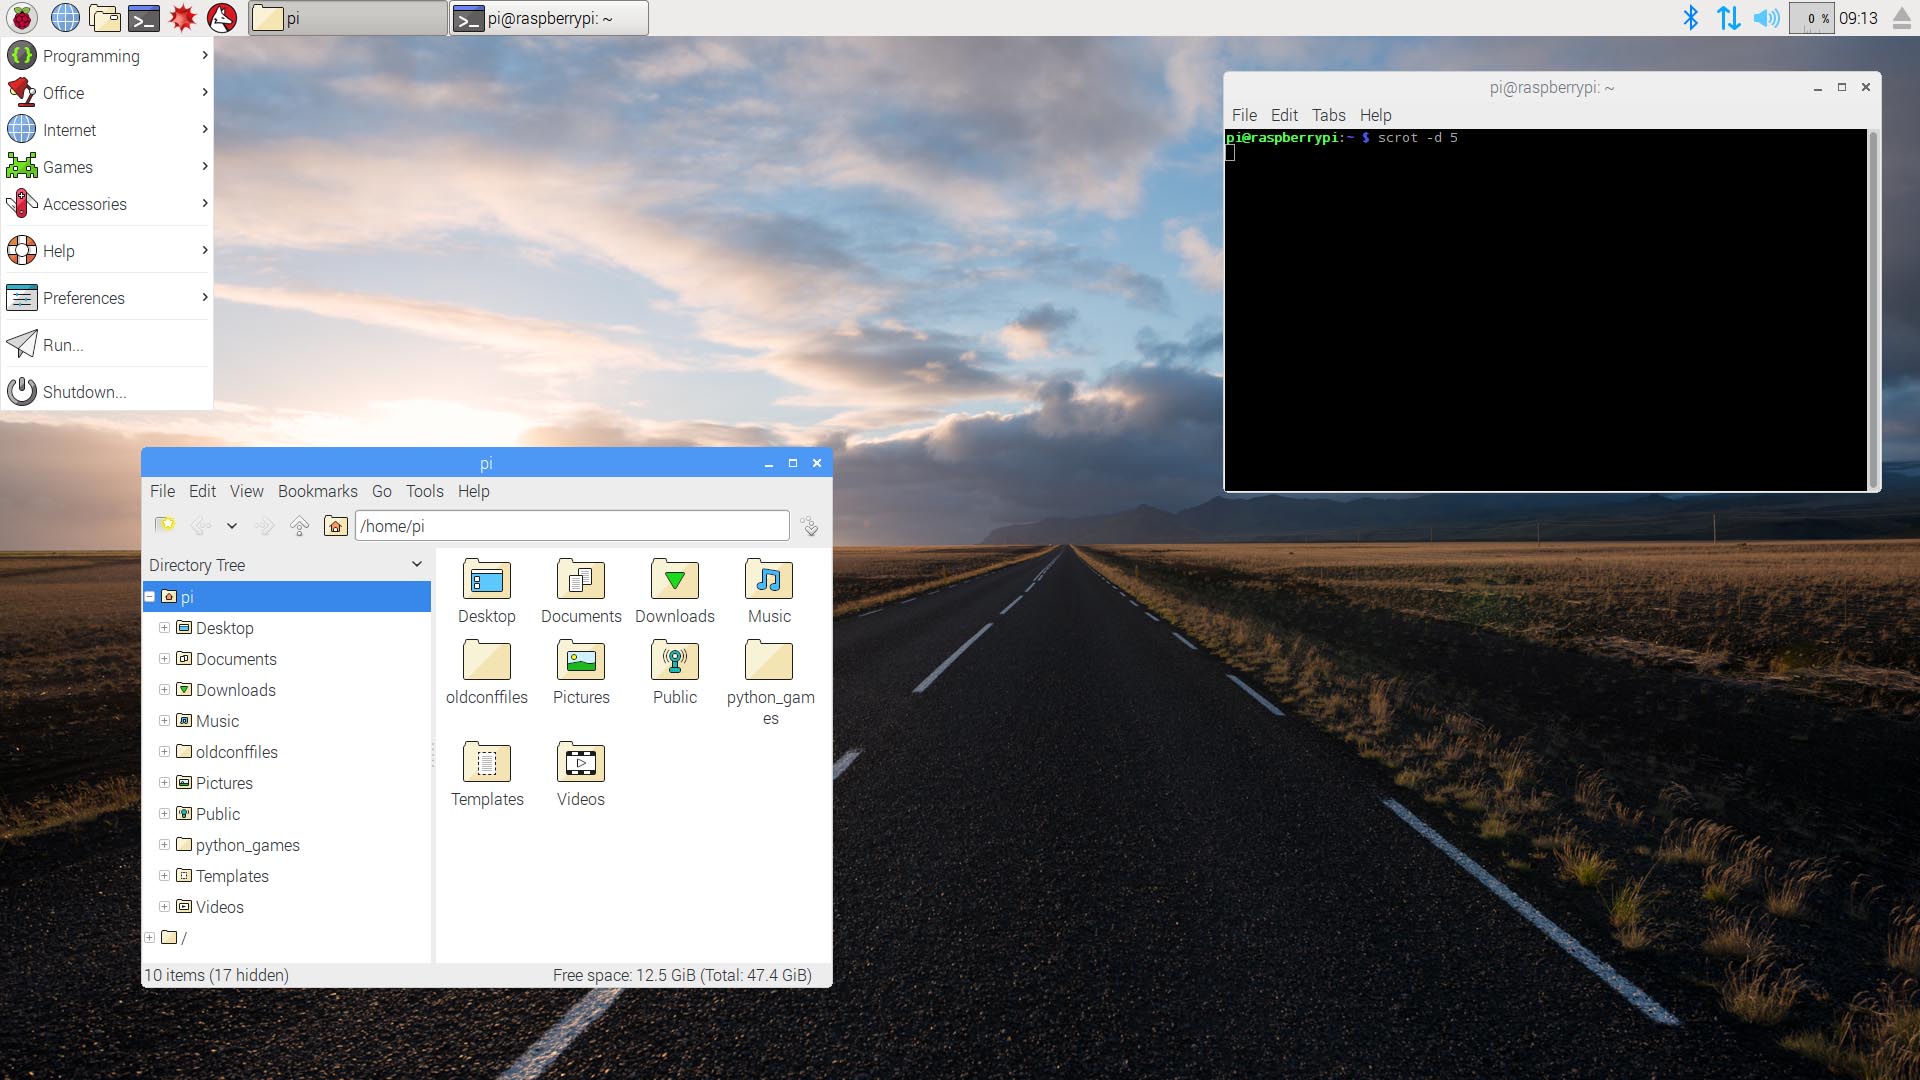 Video: Setting up Raspbian on your PC